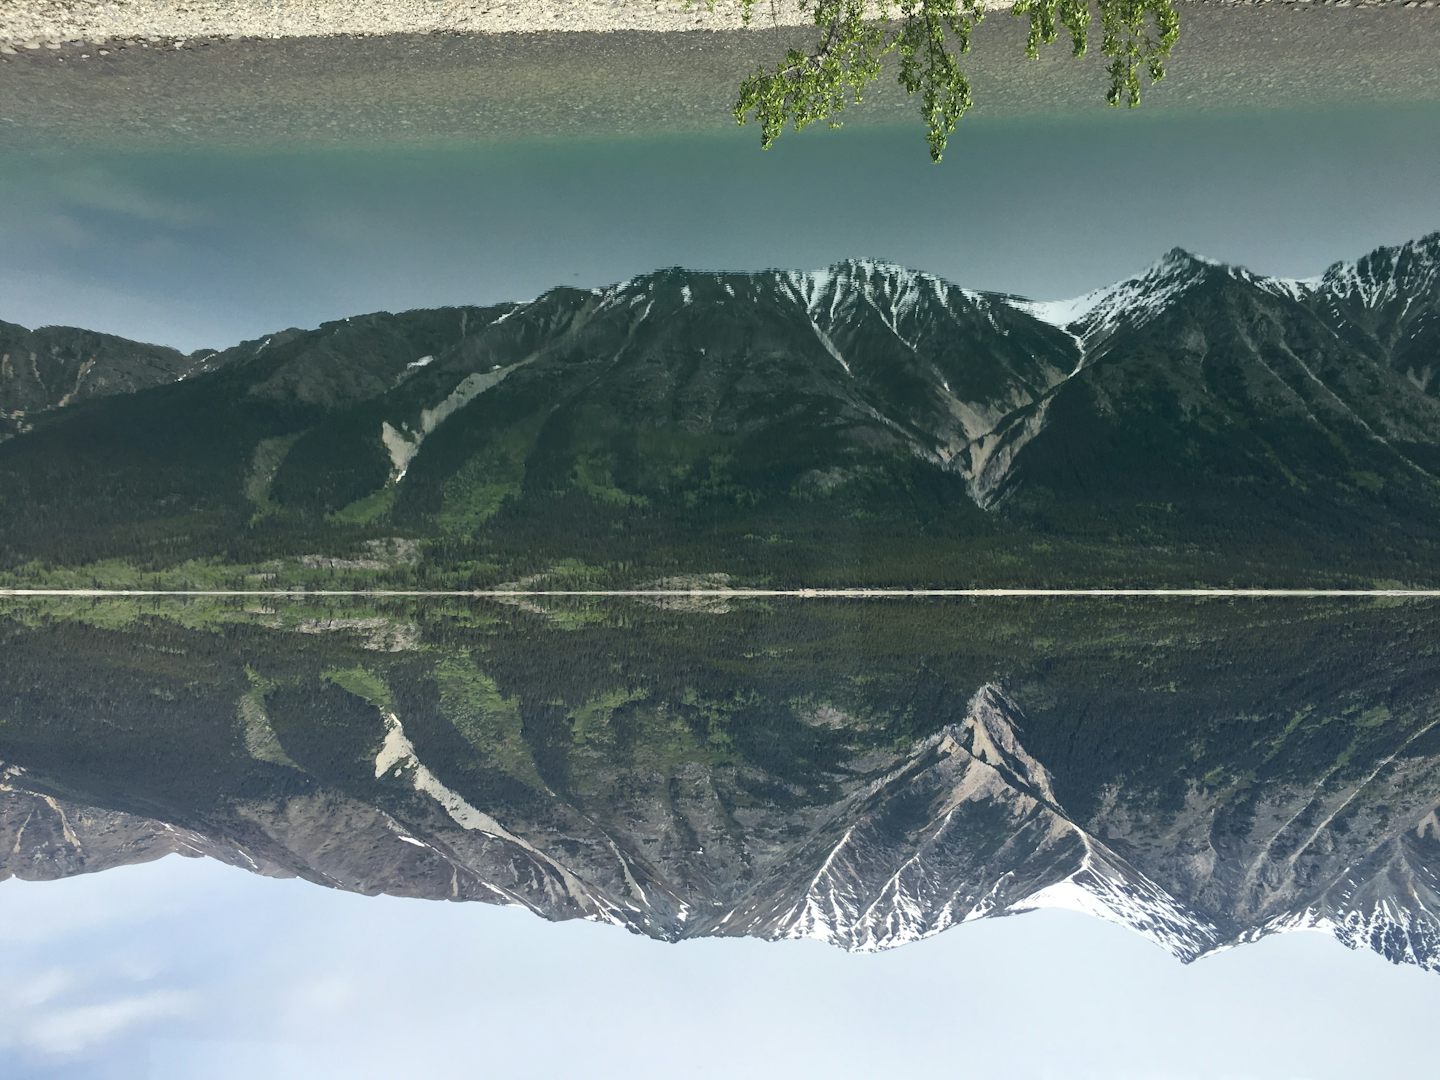 Reflection on Lake Bennet in the Yukon